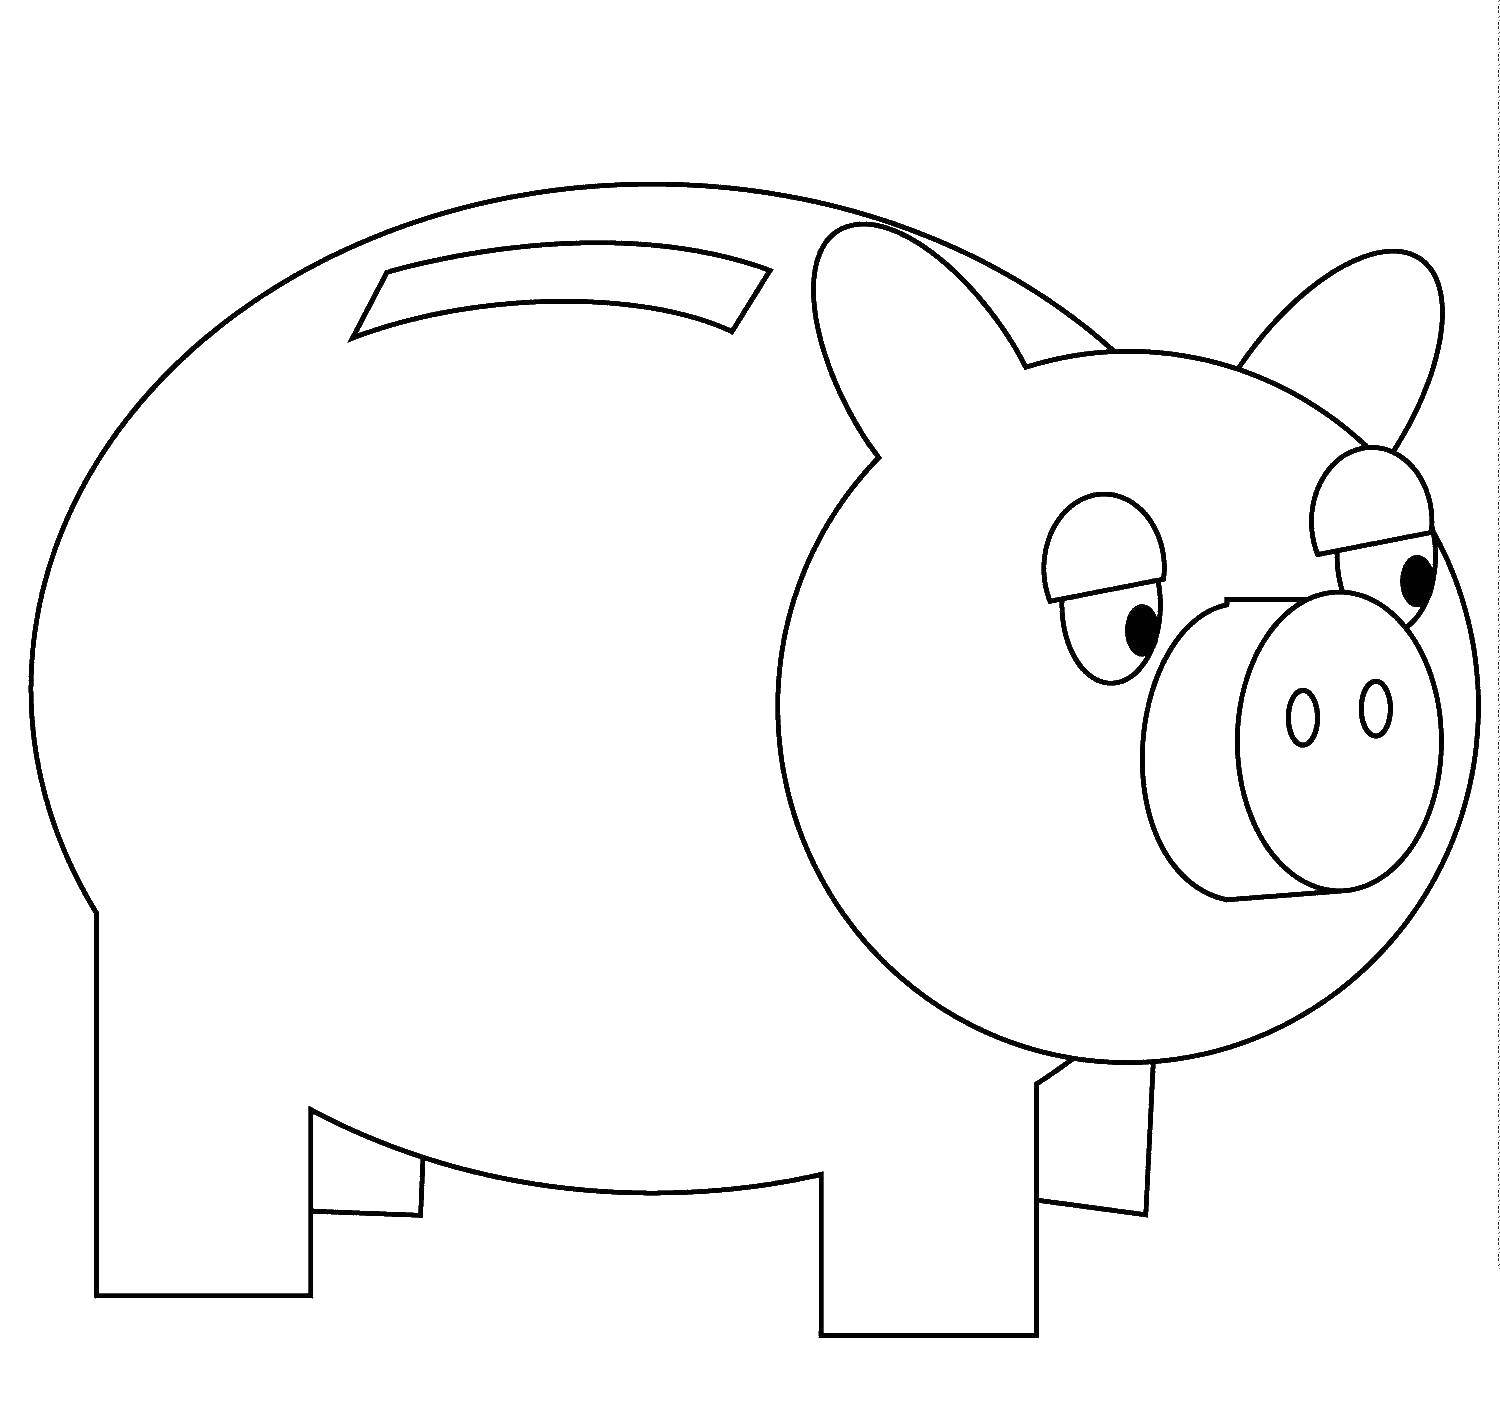 Coloring Piggy Bank pig. Category coloring. Tags:  pig, piggy Bank.